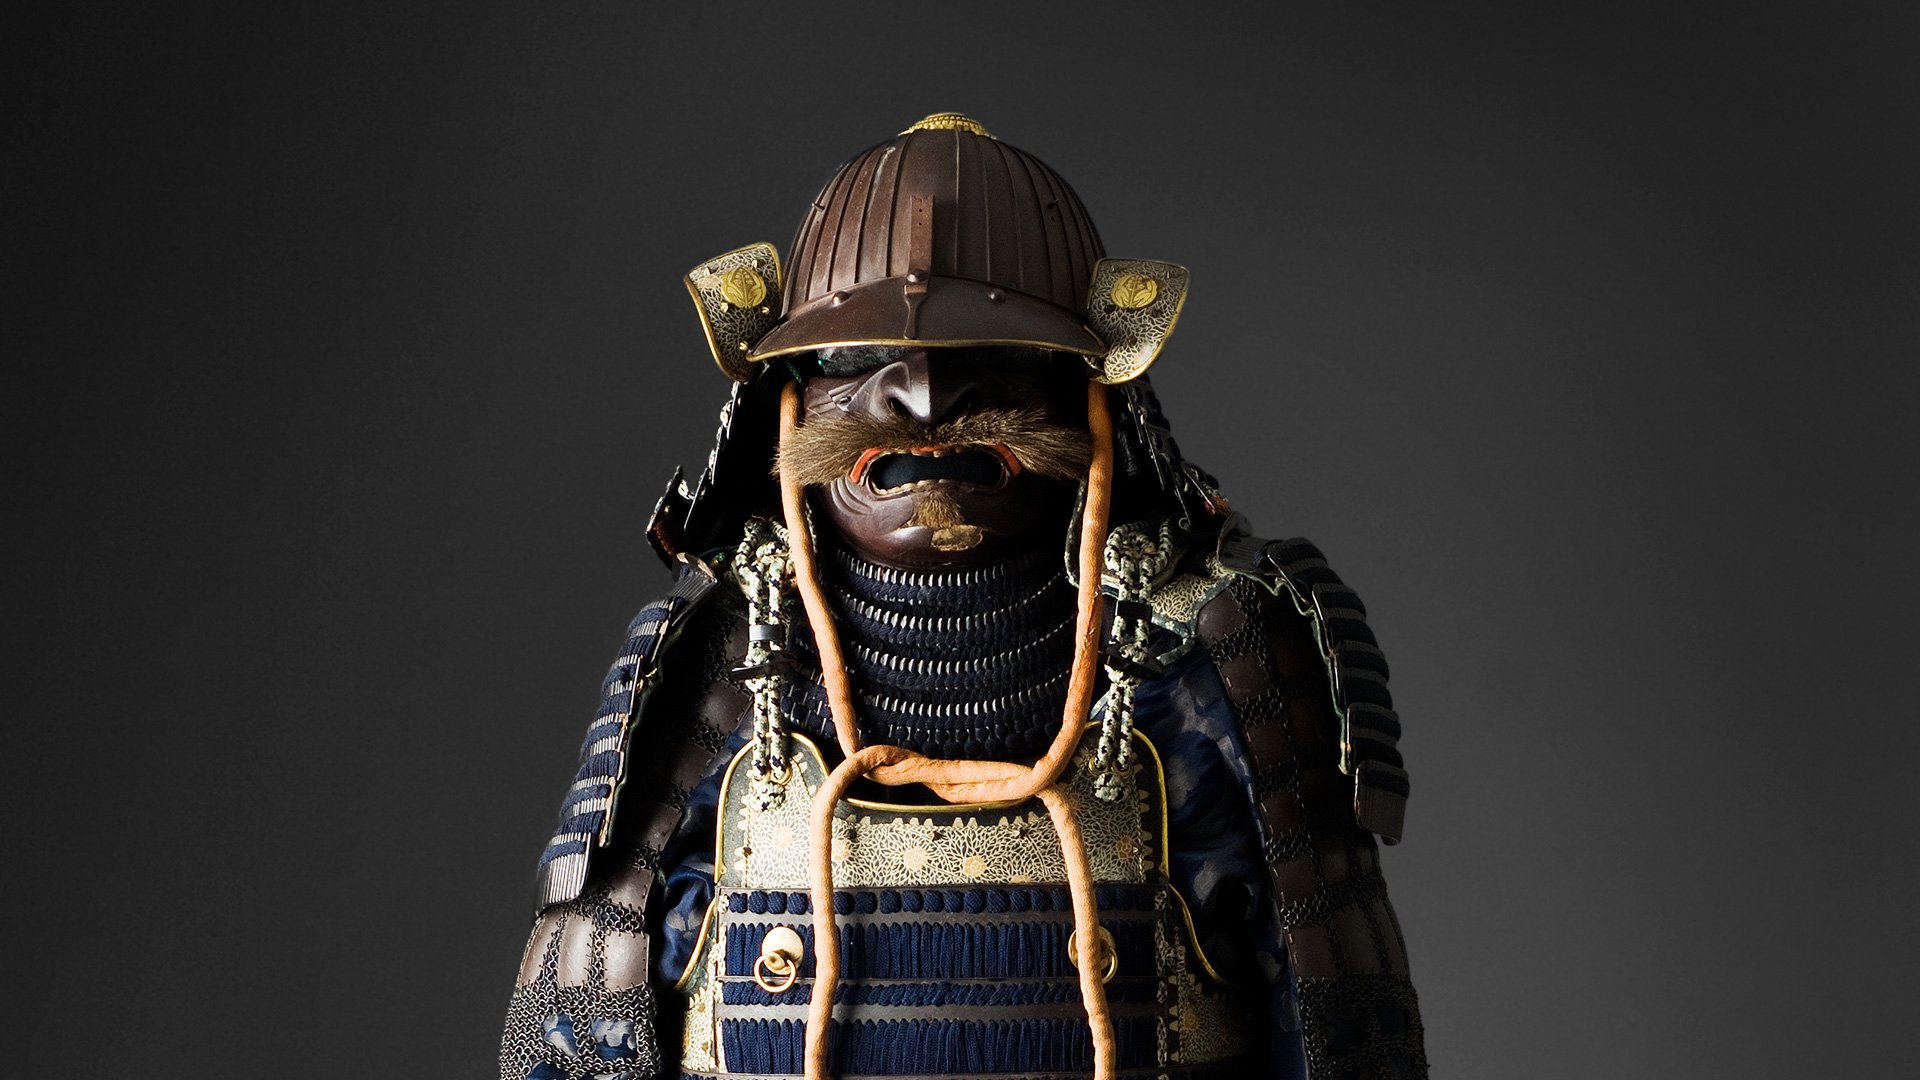 Samurai armor from the museum collections